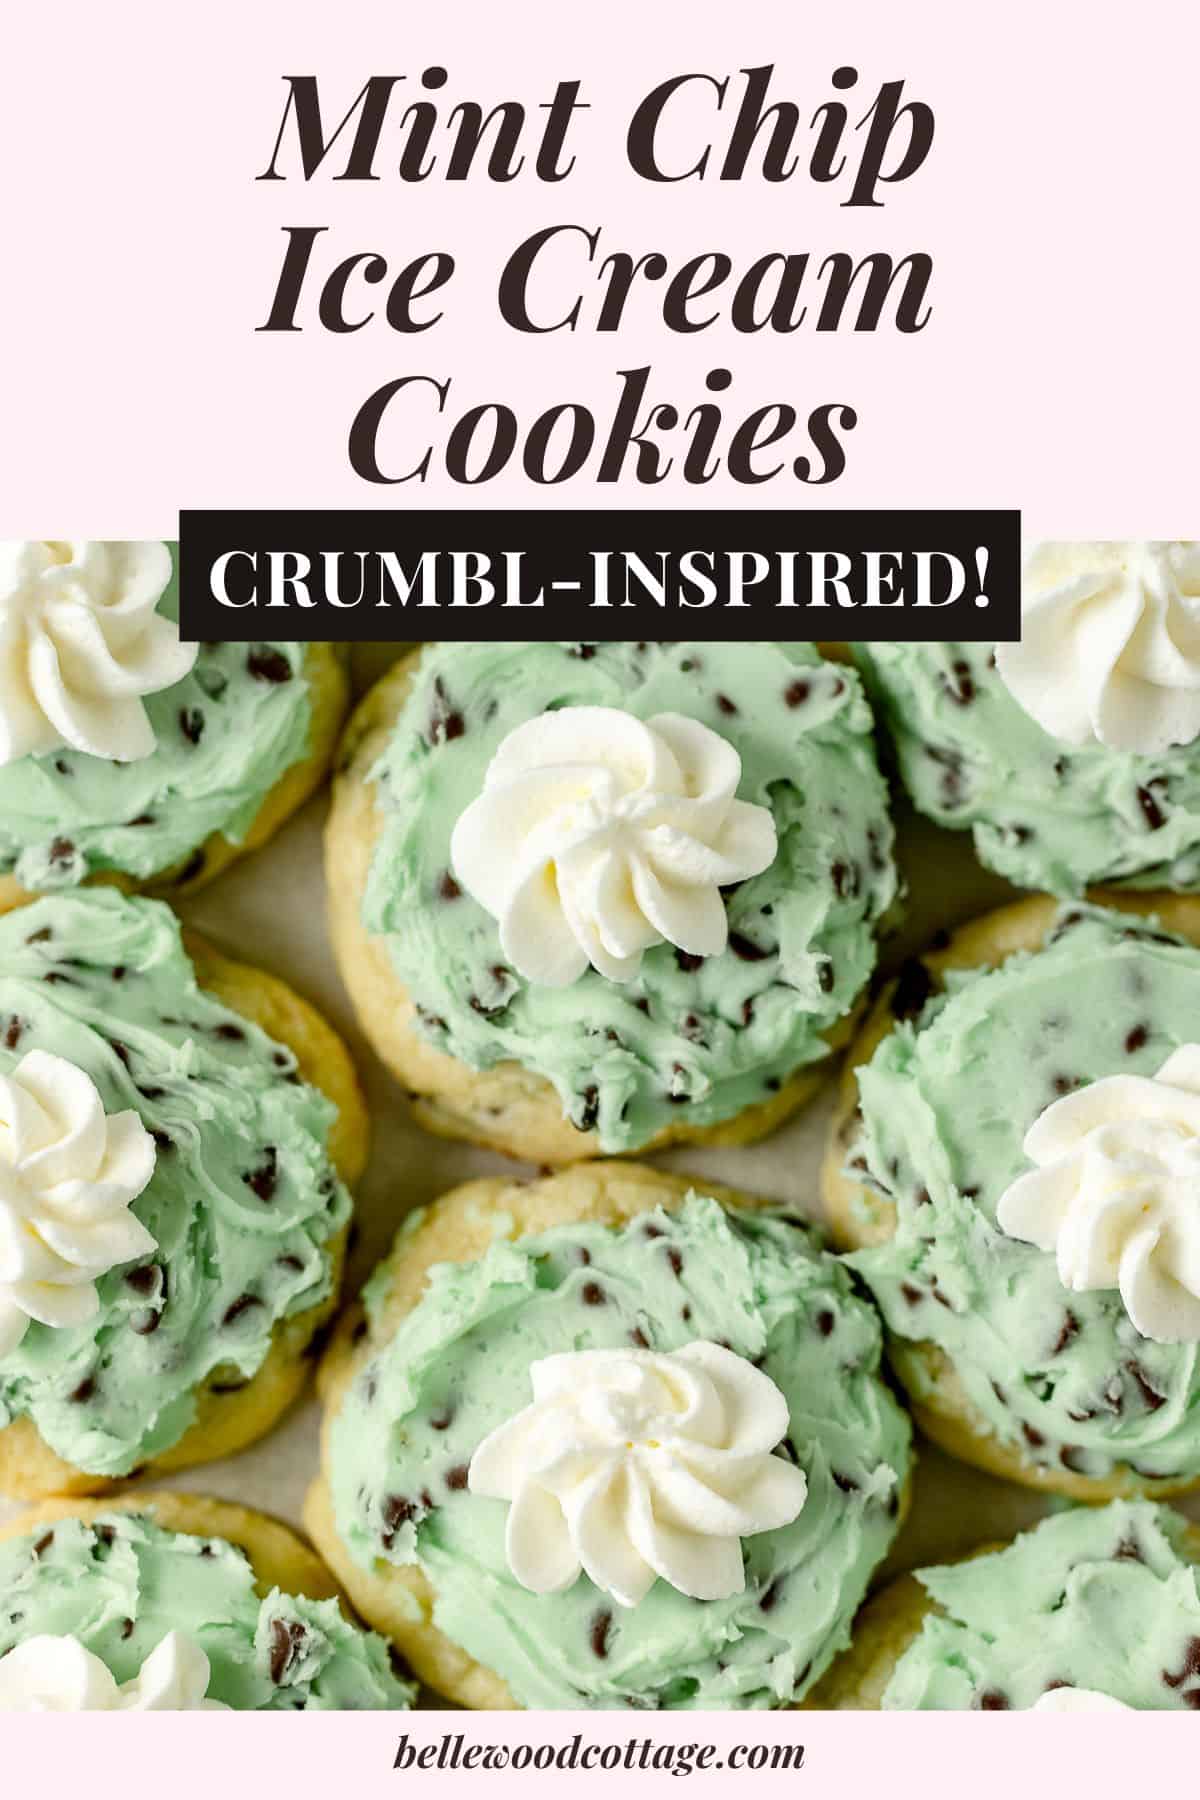 Sugar cookies frosted with green mint chocolate chip frosting and a piped rosette of whipped cream with the words, "Mint Chip Ice Cream Cookies - Crumbl Inspired".